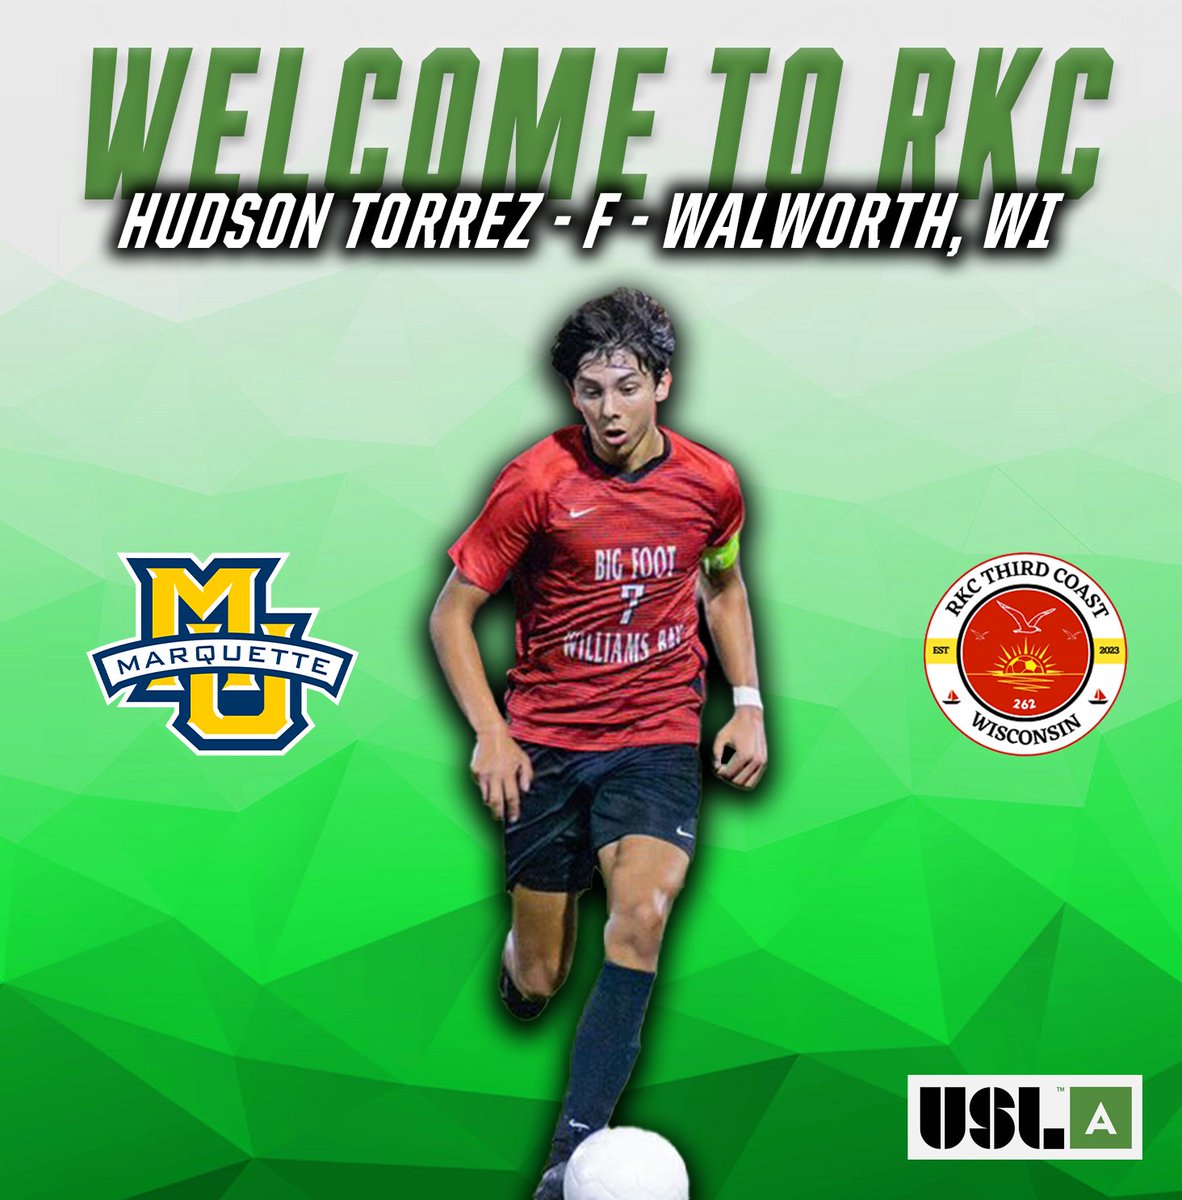 𝓣𝓗𝓔 𝓝𝓔𝓧𝓣 𝓤𝓟

Our next group of @USL_Academy signees is here!

Interested in joining RKC? Visit our website (link in bio) to learn more!

#BringYourAGame | #262Made